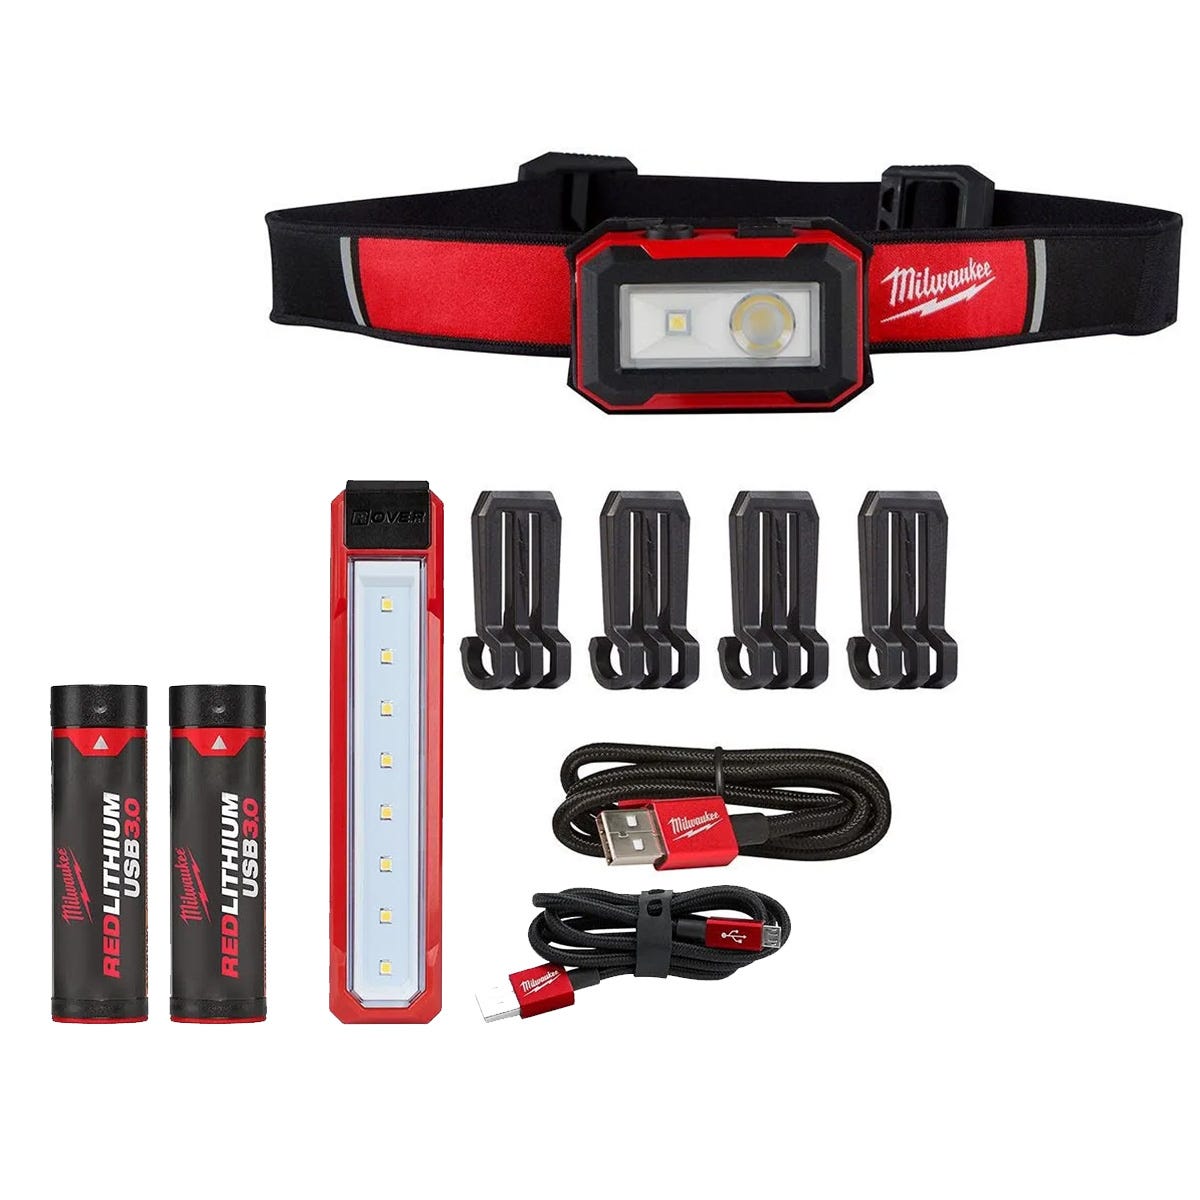 Milwaukee 445 Lumens LED REDLITHIUM USB Rover Pocket Flood Light Kit, Two  USB 3.0 Ah Batteries, and Rechargeable 450-Lumens Magnetic Headlamp with  Task Light